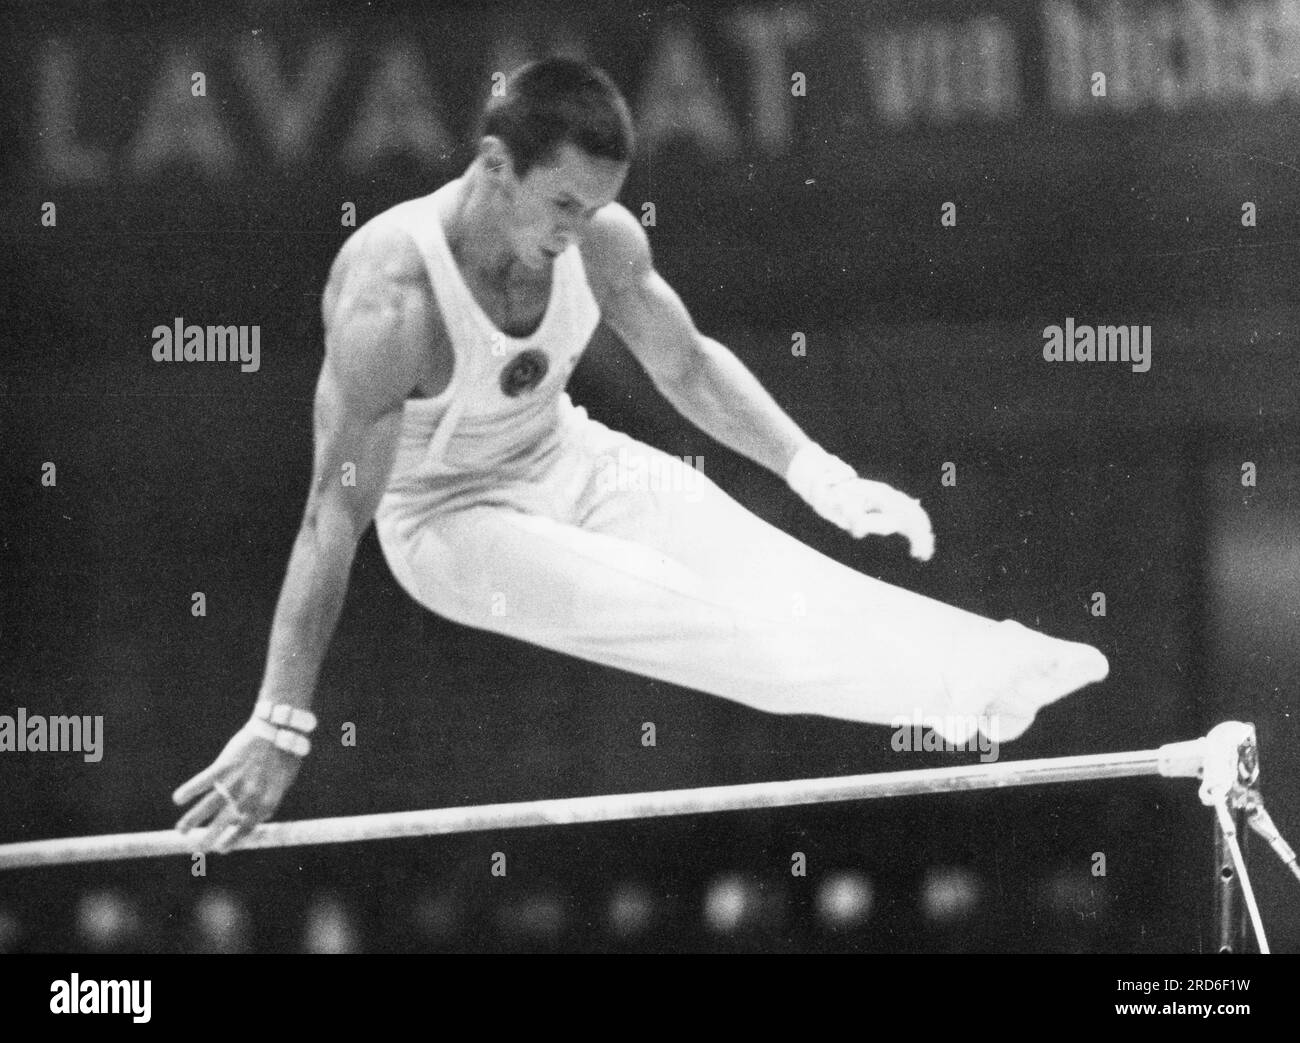 Voronin, Mikhail Yakovlievitch, 29.3.1945 - 22.5.2004, Russian gymnast, exercise on the high bar, ADDITIONAL-RIGHTS-CLEARANCE-INFO-NOT-AVAILABLE Stock Photo